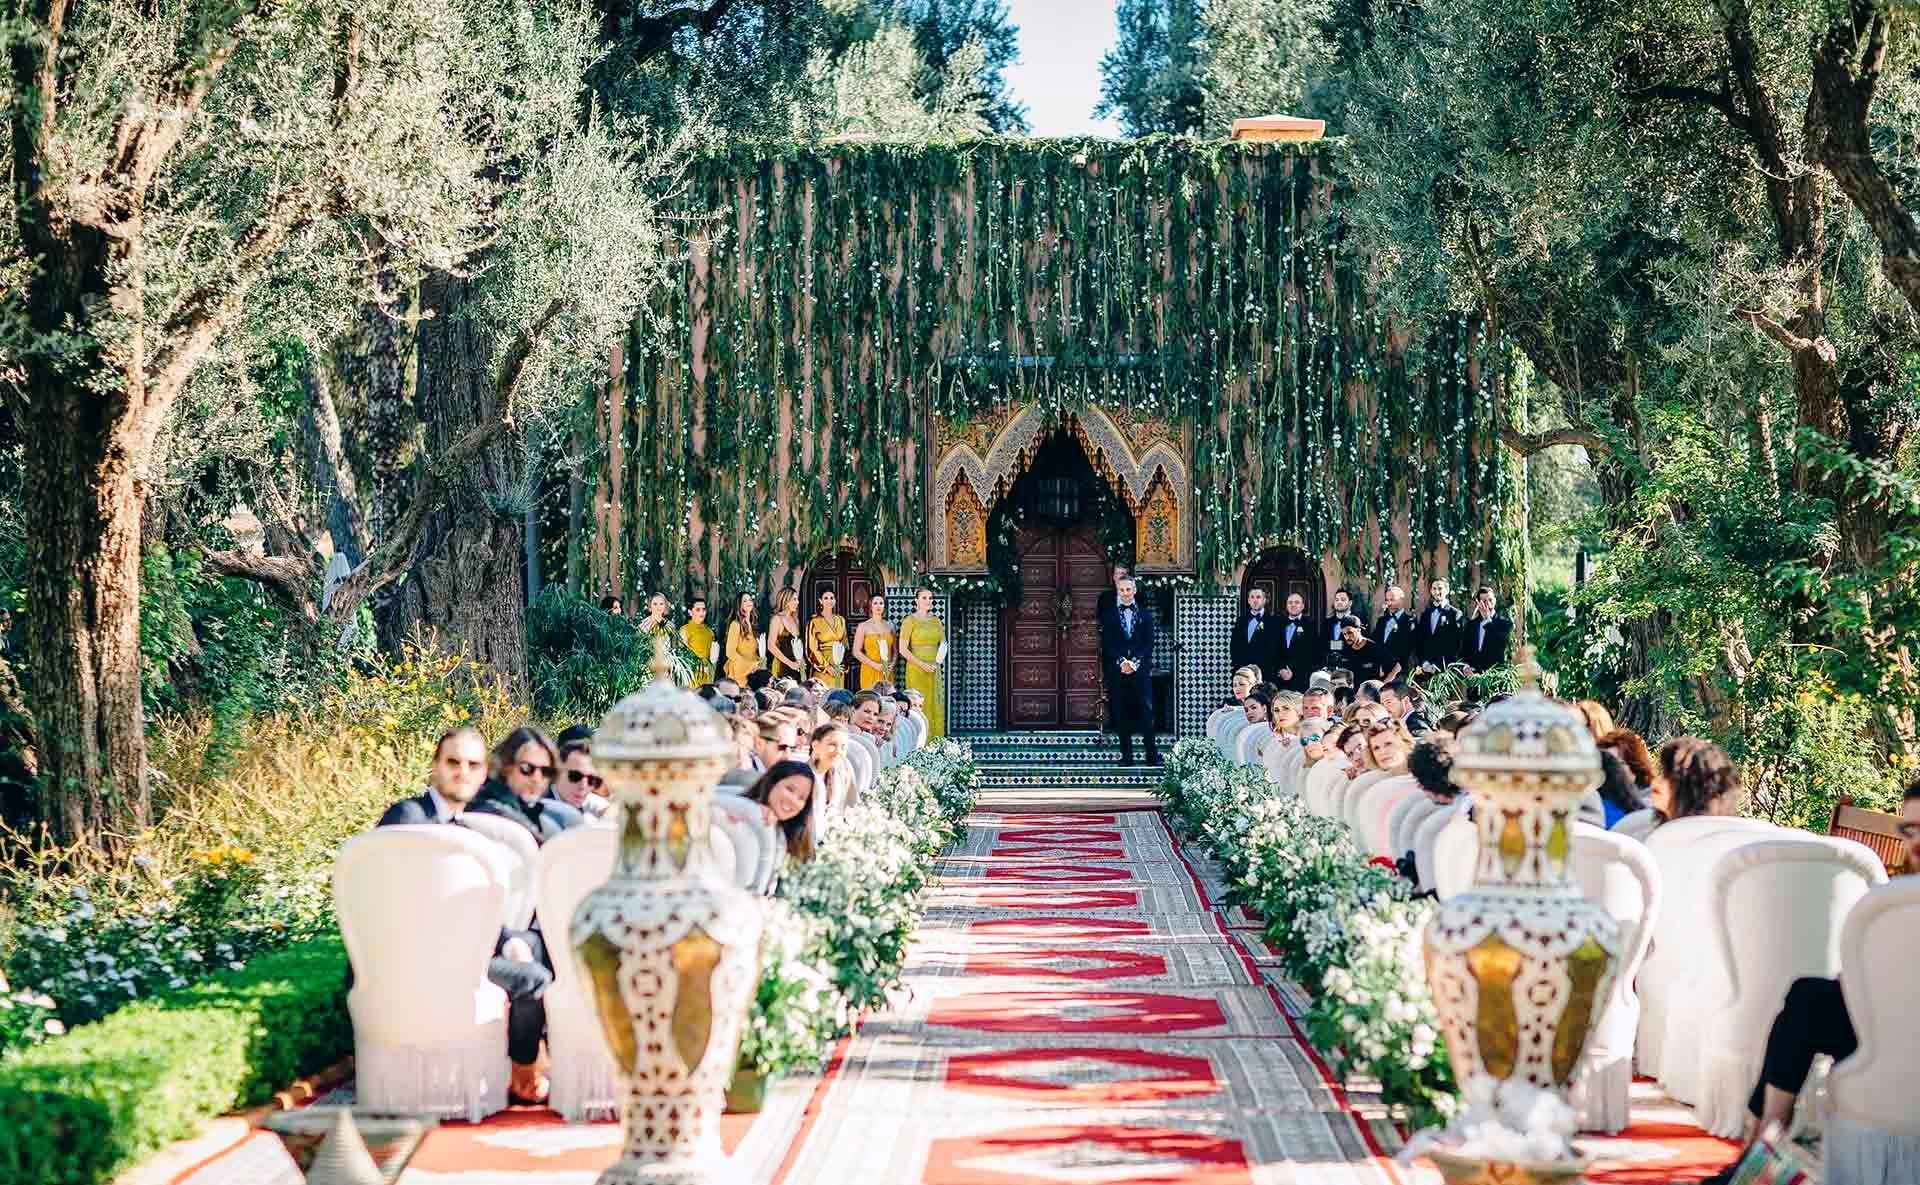 Morocco wedding planner specialist for newly married couples